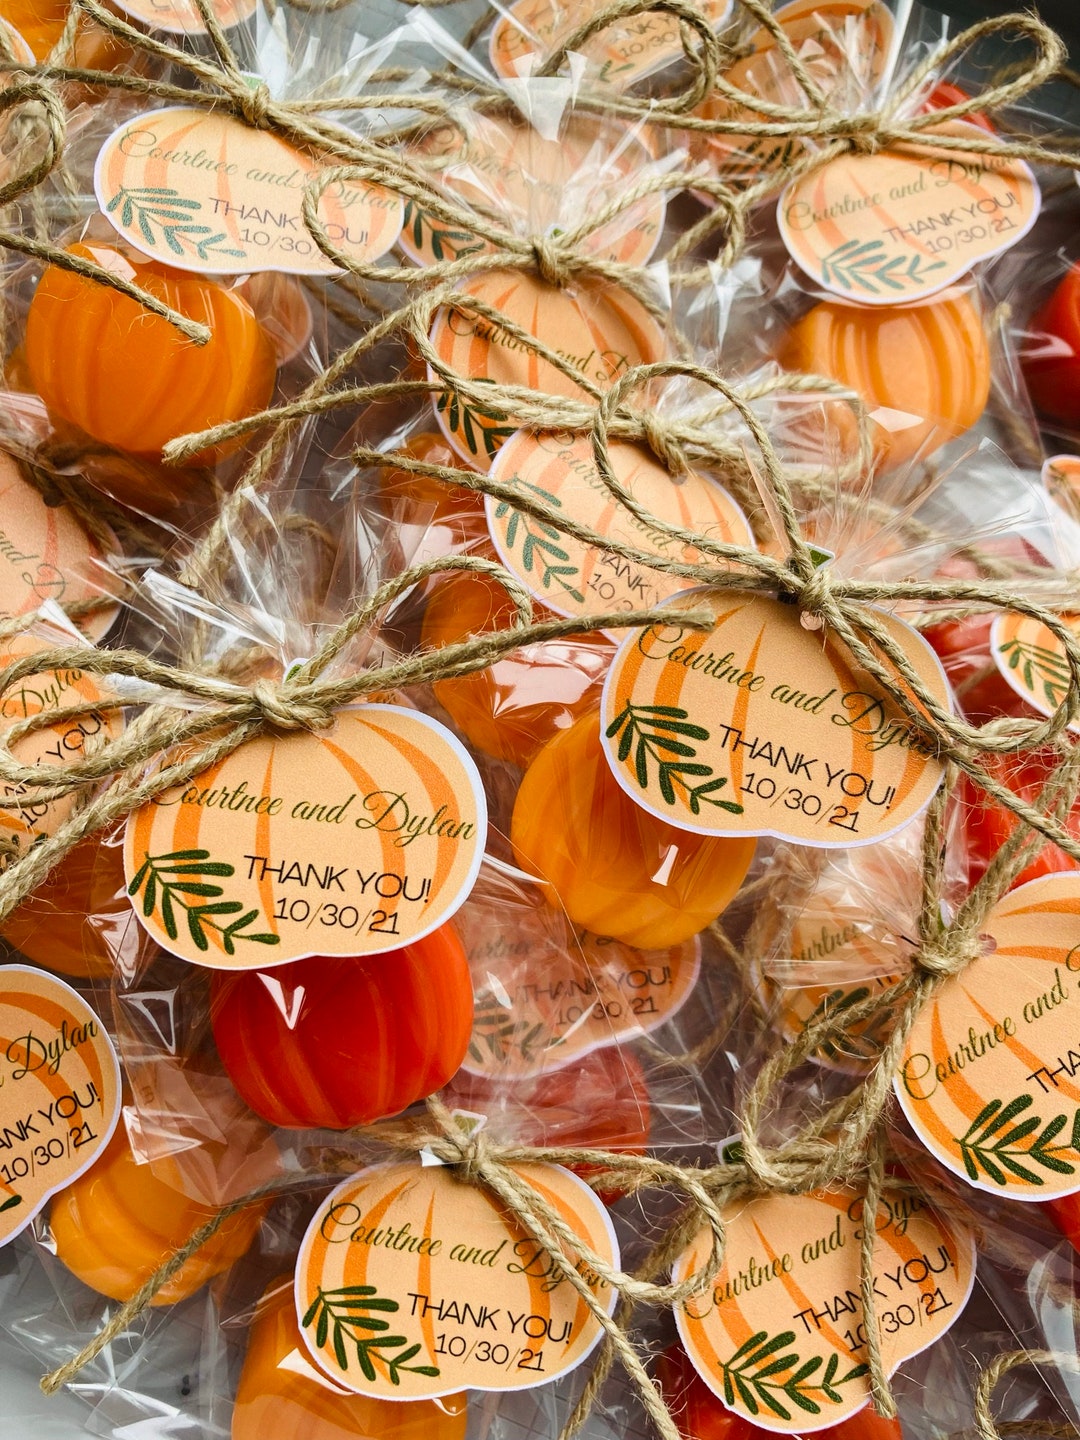 Baby Shower Favor Bags, Fall Baby Shower Favors, Birthday Favor Bags, Our Little Pumpkin, Baby Shower Treat Bag